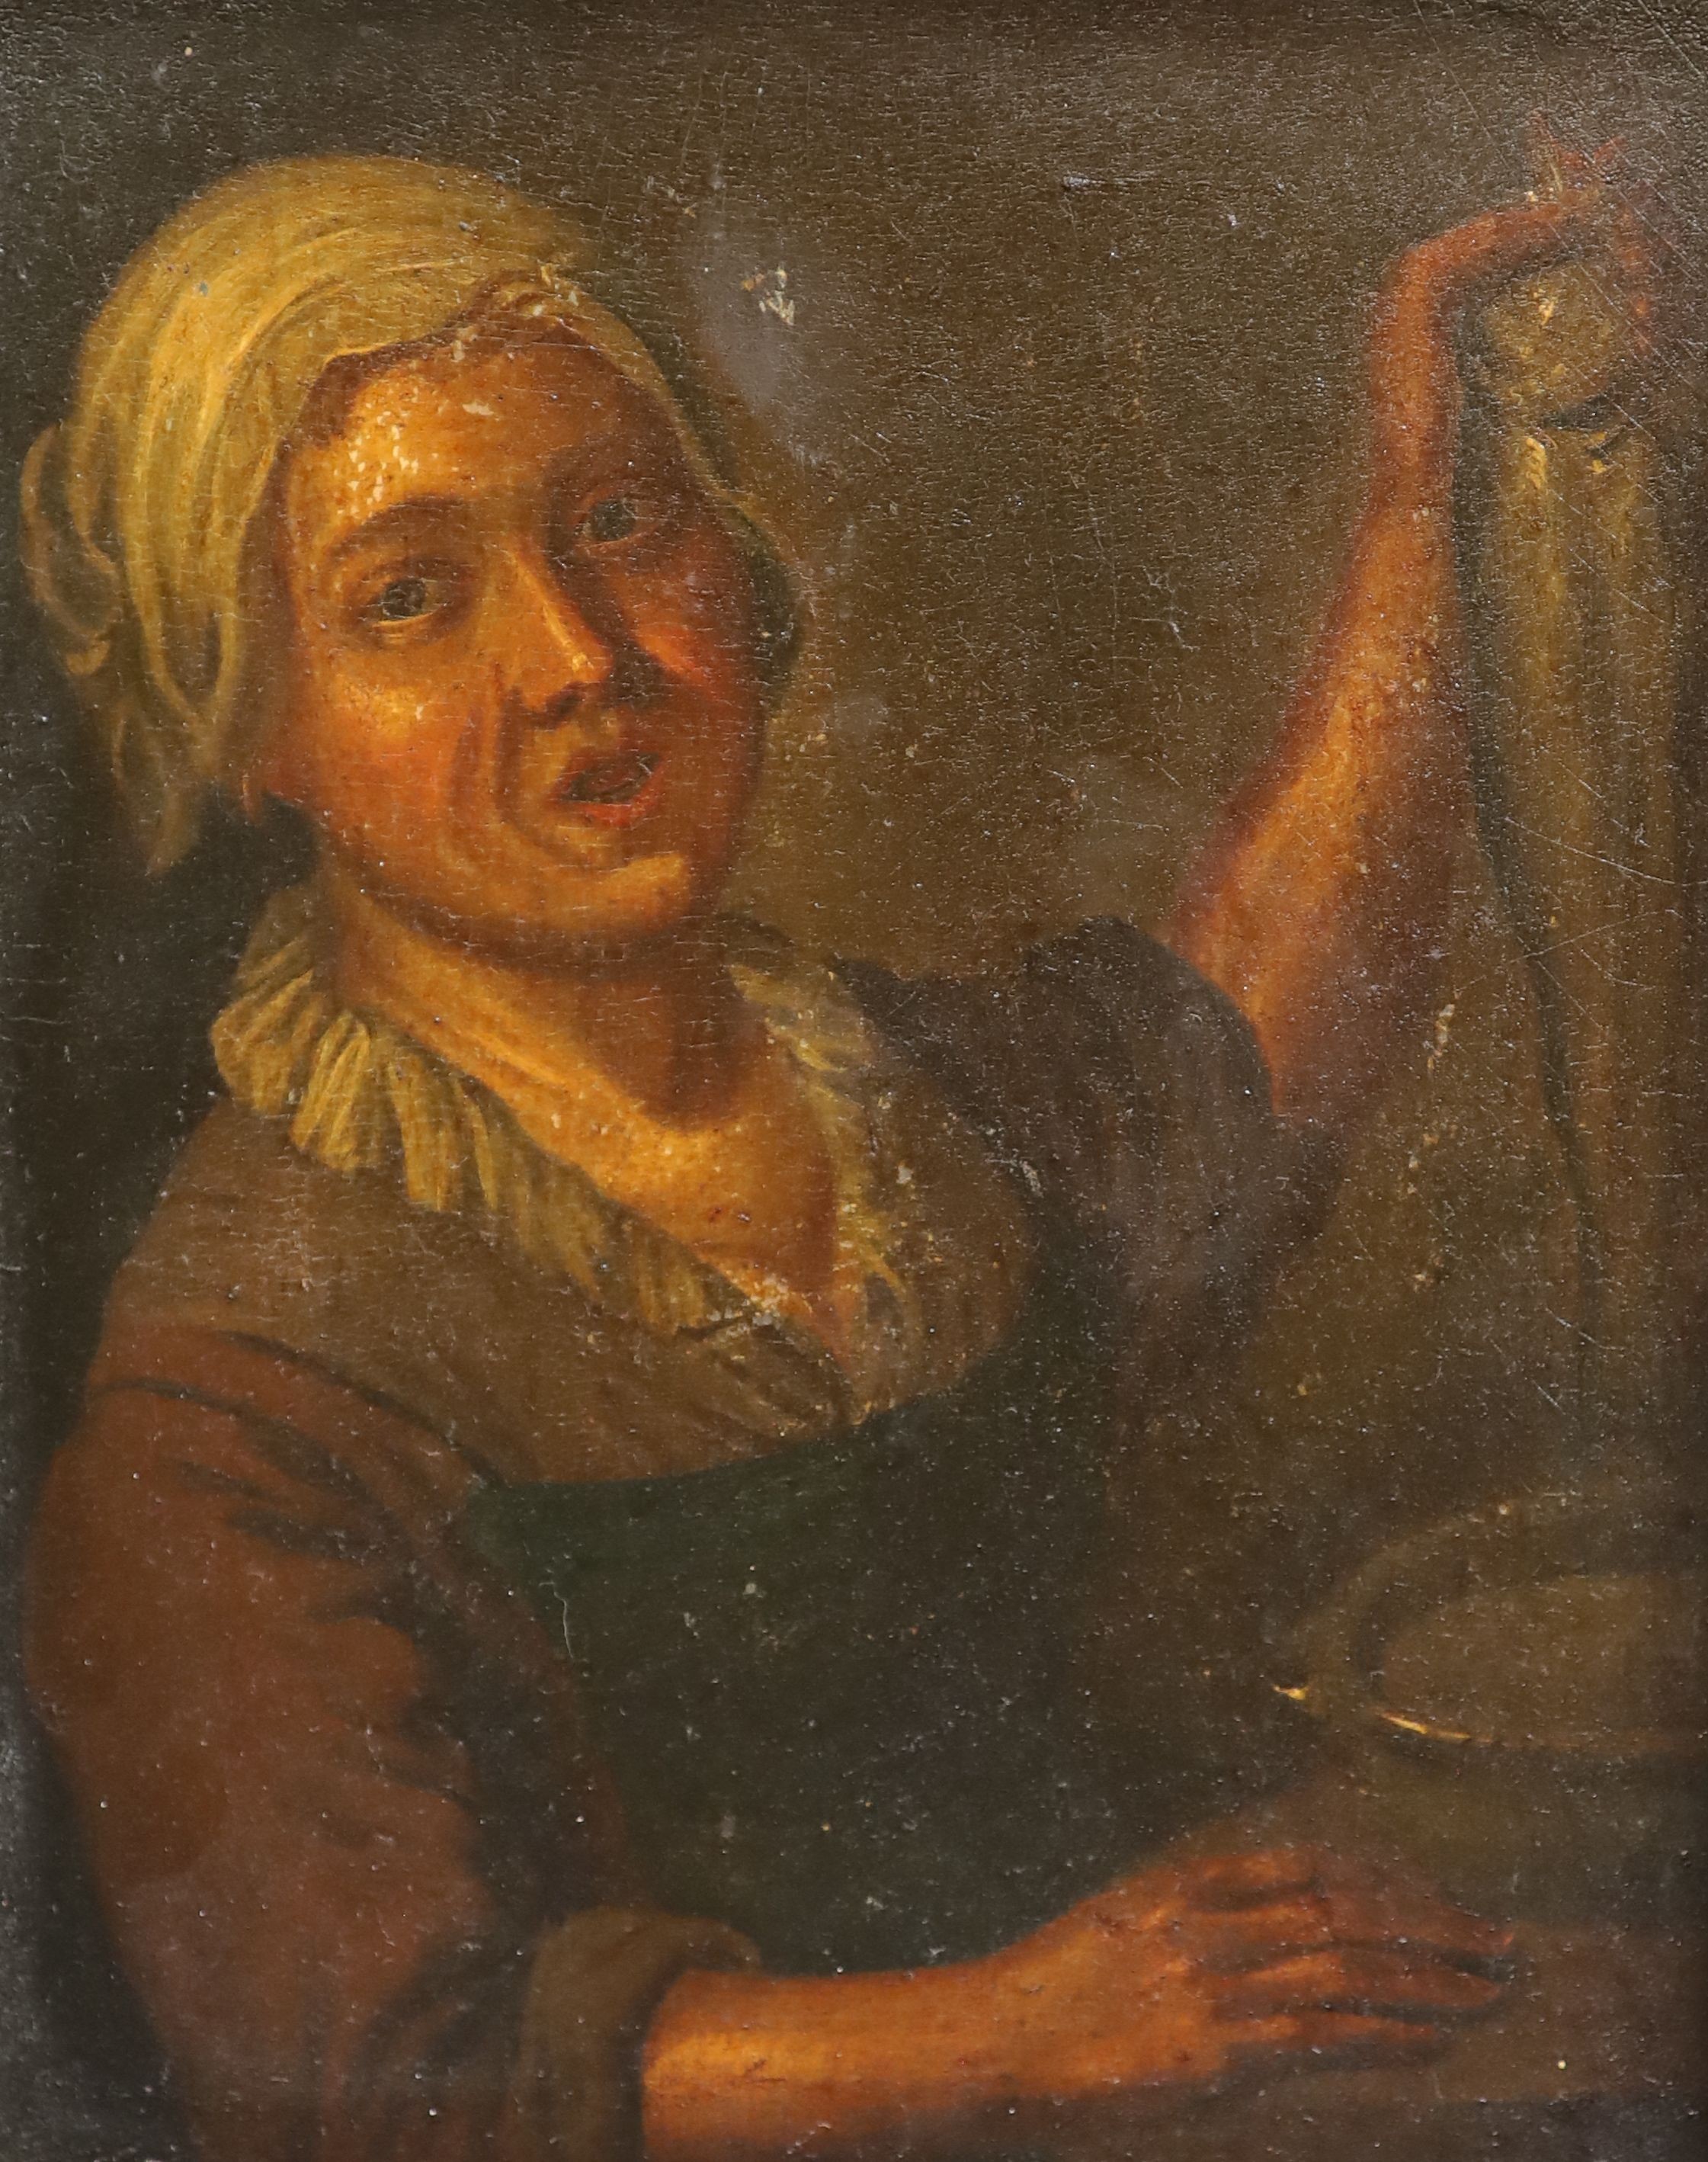 Attributed to Adrian Carpentiers (1760-1778), A woman holding a fish, Oil on wooden panel, 23.5 x 19cm